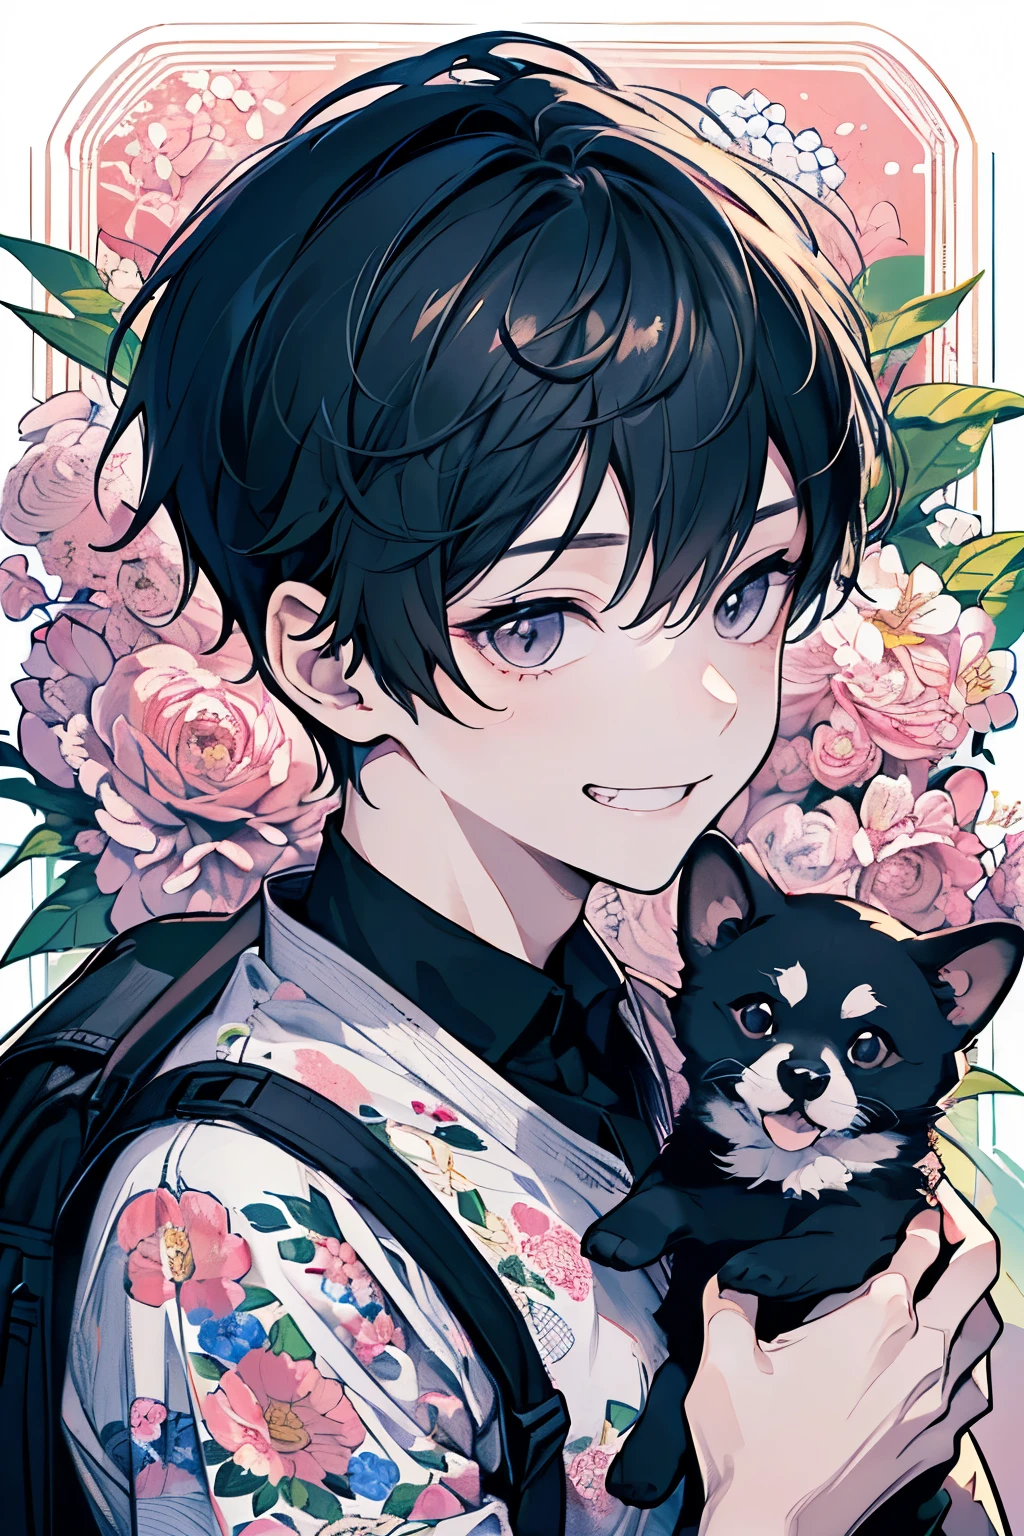 ((young boy:1.1)),((A boy about 5 years old:1.2)),((Shota:1.2)),(Oversized floral T-shirt:1.35),Prompt: An incredibly charming  carrying a backpack, accompanied by her adorable puppy, enjoying a lovely spring outing surrounded by beautiful  flowers and natural scenery. The illustration is in high definition at 4k resolution, with highly-detailed facial features and cartoon-style visuals,((A big smile:1.25)).